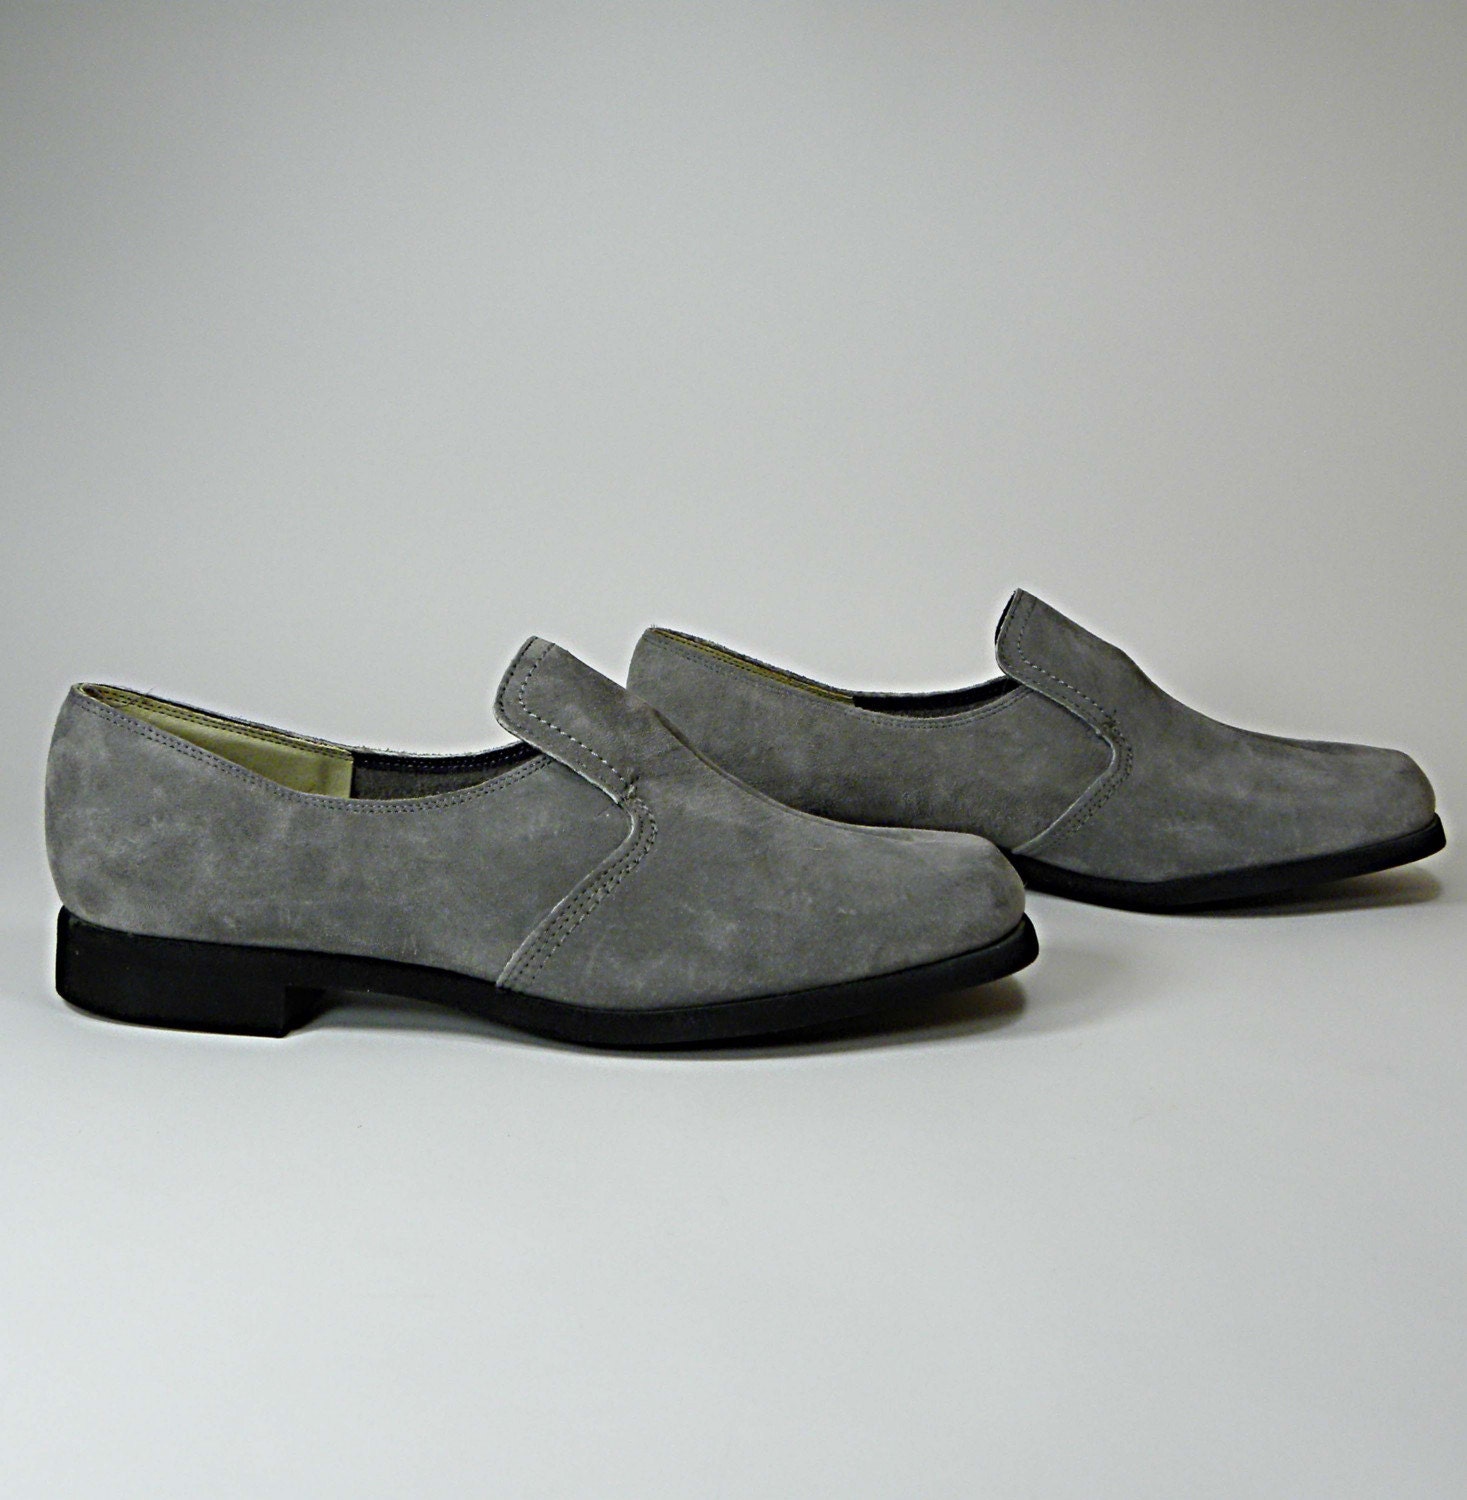 gray suede loafers . 1960s vintage Hush Puppy by jetsetvintage